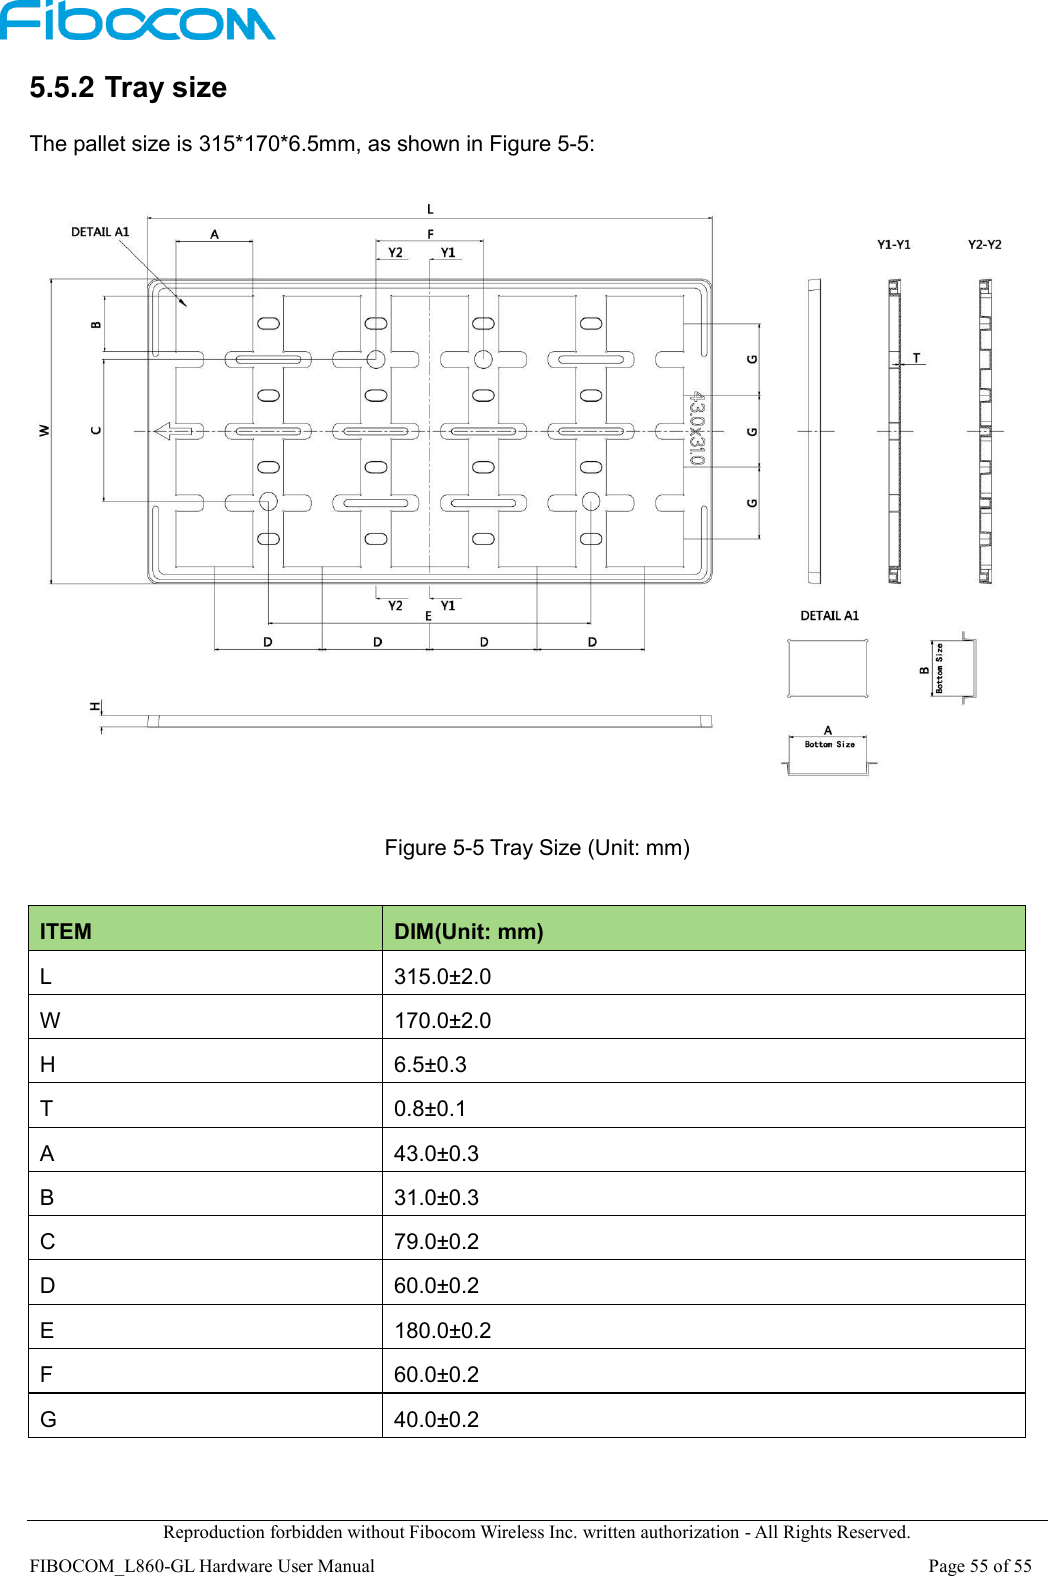  Reproduction forbidden without Fibocom Wireless Inc. written authorization - All Rights Reserved. FIBOCOM_L860-GL Hardware User Manual                                                                                                                      Page 55 of 55 5.5.2 Tray size The pallet size is 315*170*6.5mm, as shown in Figure 5-5:   Figure 5-5 Tray Size (Unit: mm)     ITEM DIM(Unit: mm) L 315.0±2.0 W 170.0±2.0 H 6.5±0.3 T 0.8±0.1 A 43.0±0.3 B 31.0±0.3 C 79.0±0.2 D 60.0±0.2 E 180.0±0.2 F 60.0±0.2 G 40.0±0.2 